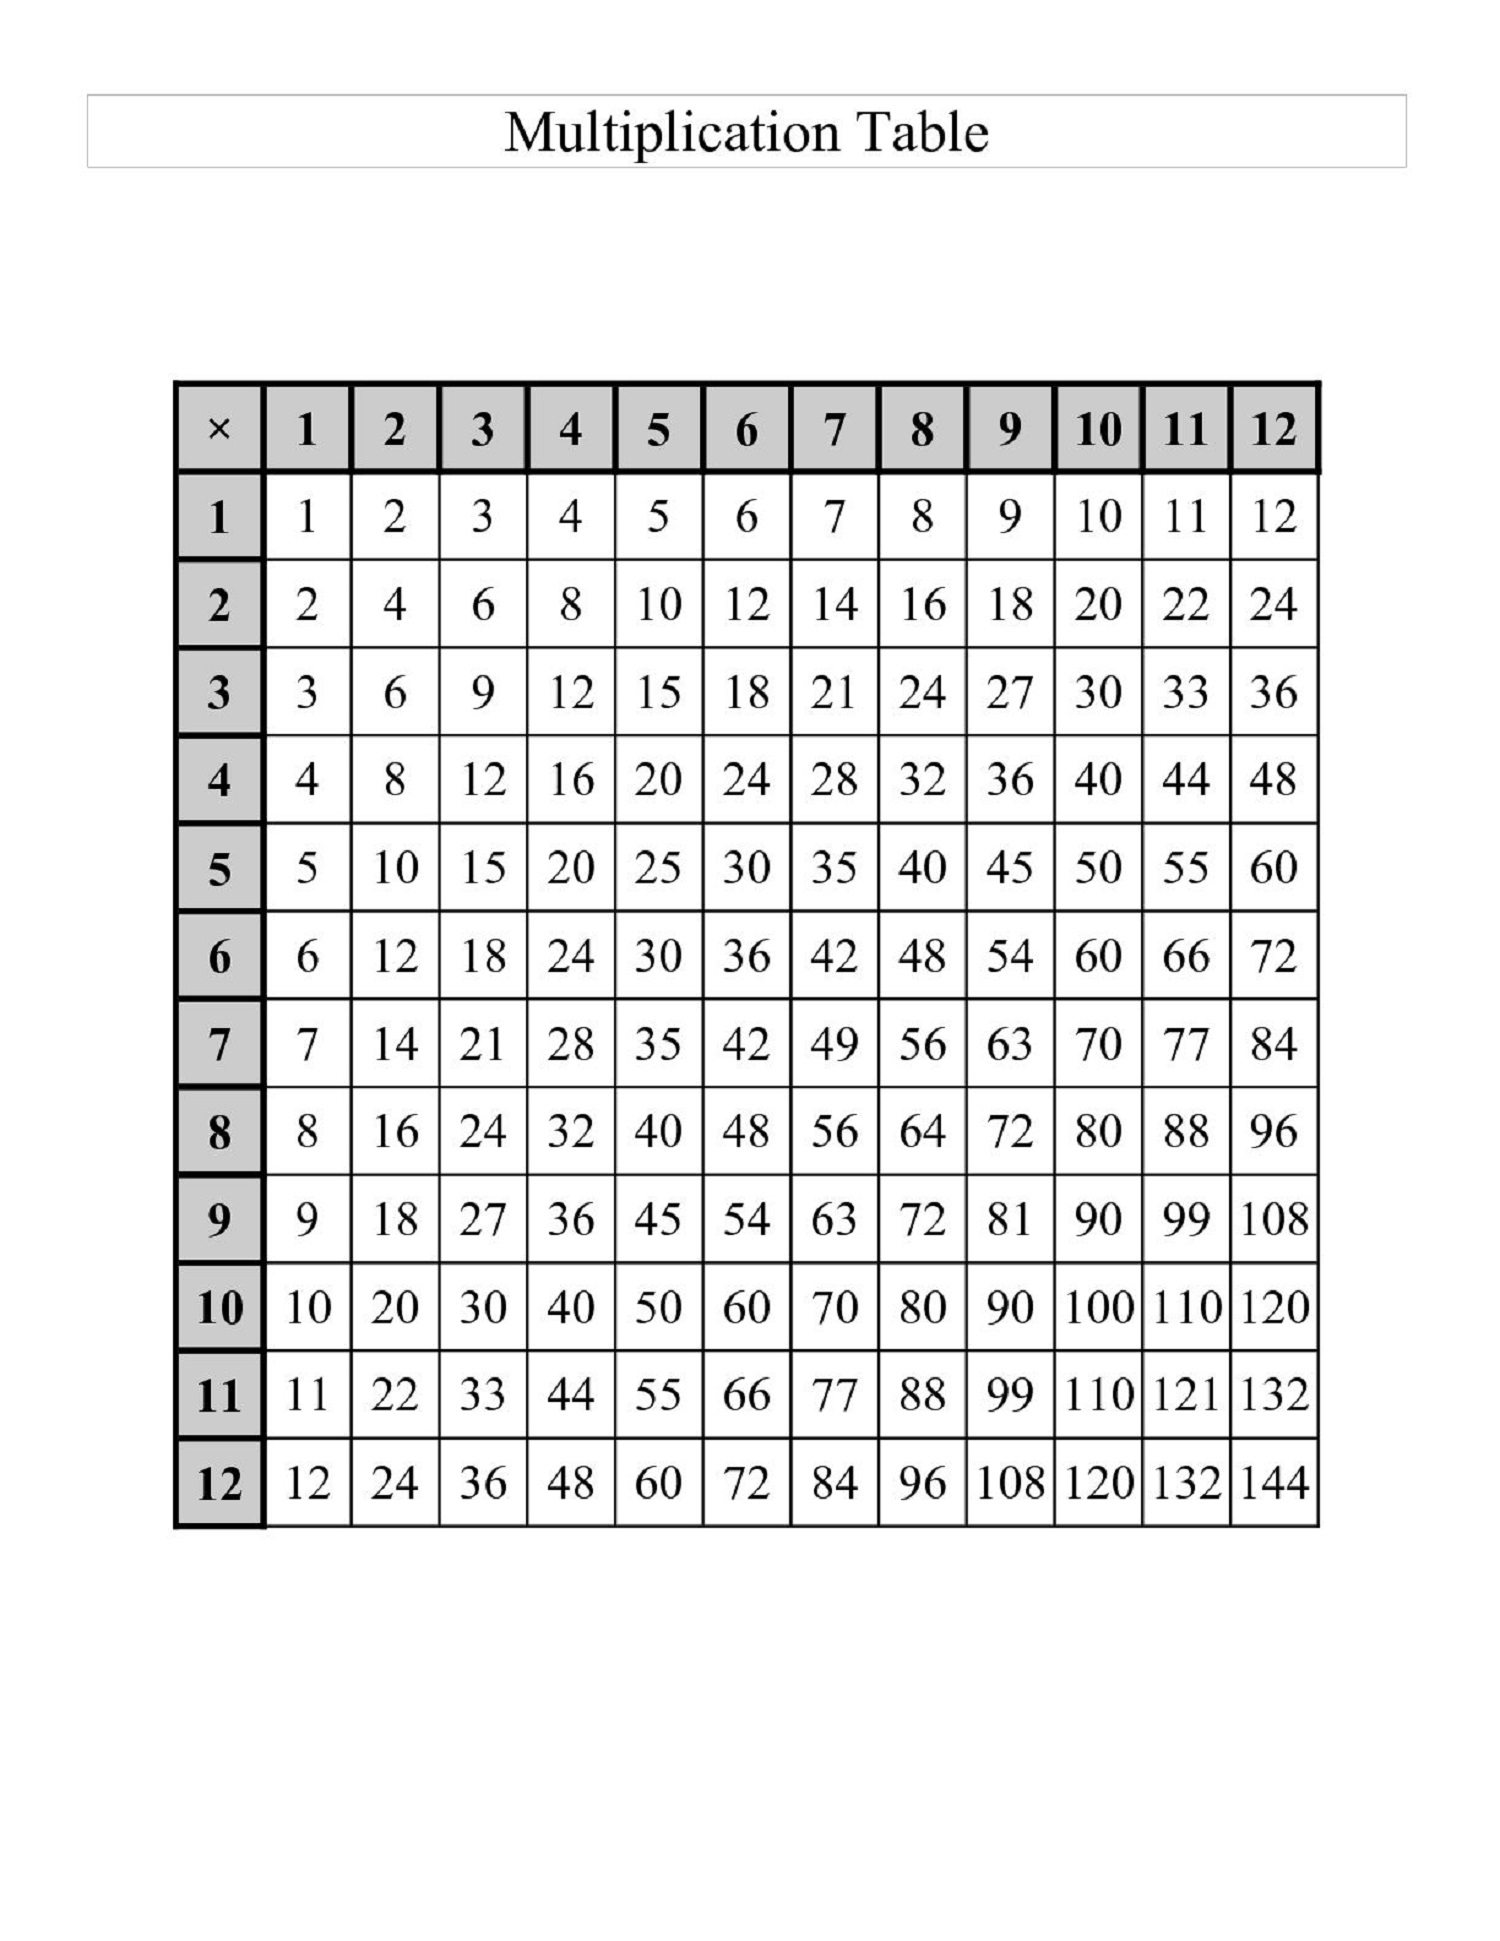 15 by 15 multiplication chart - customver